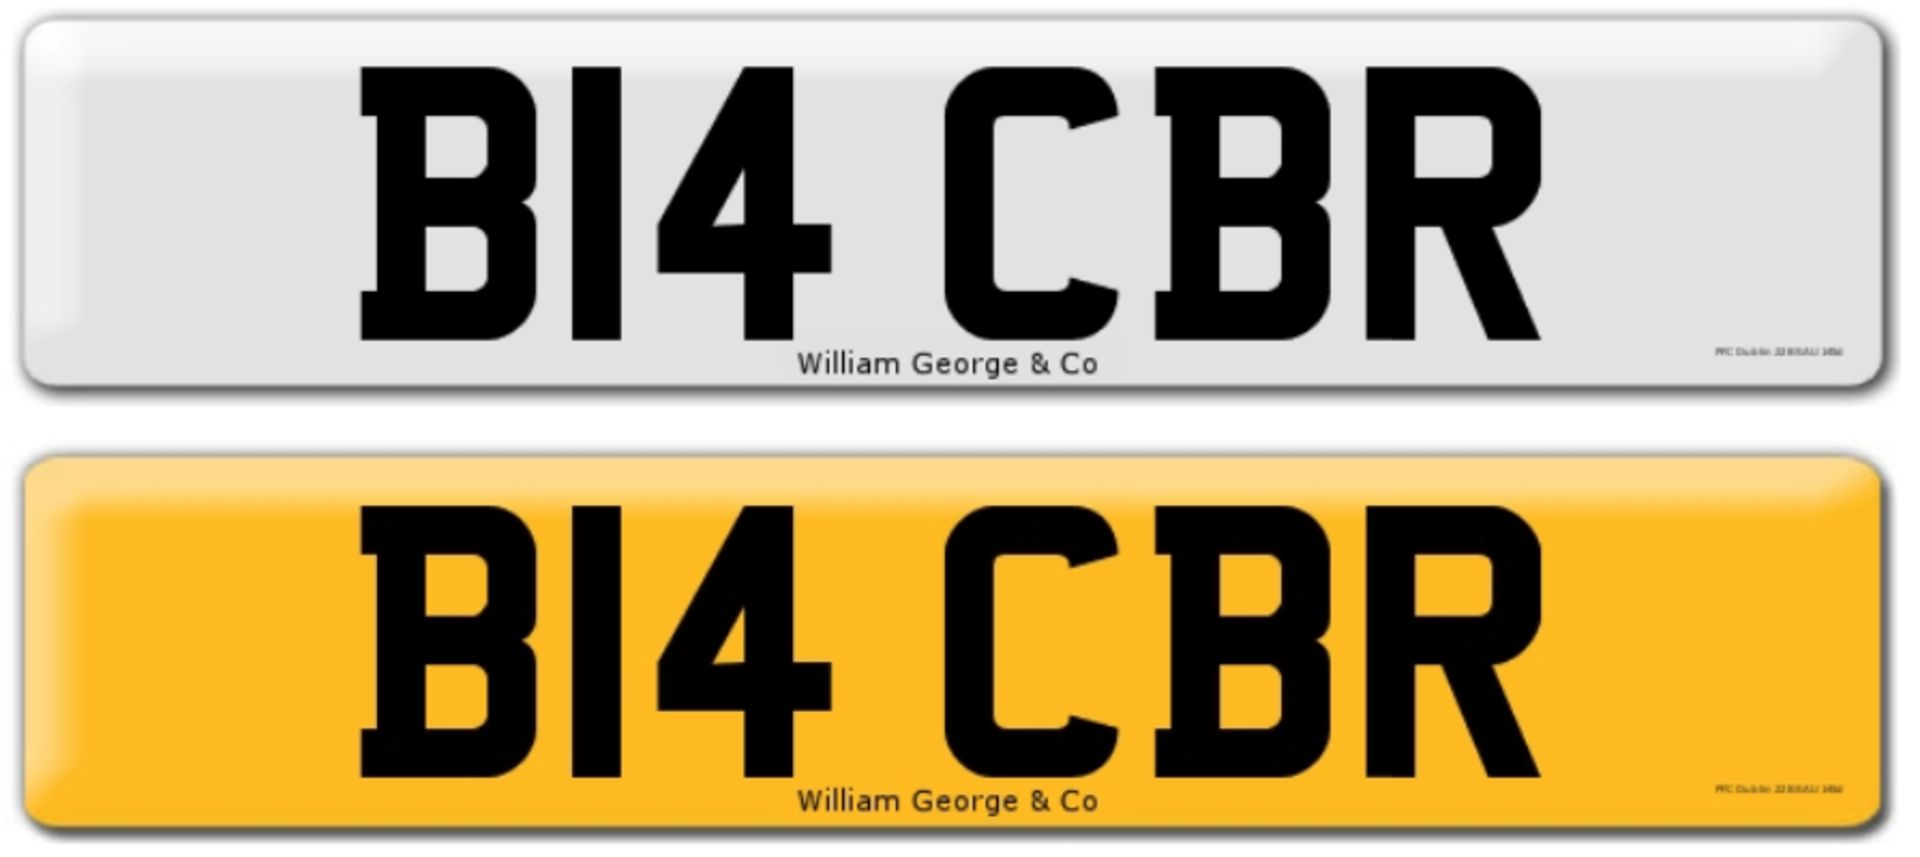 Registration on DVLA retention certificate, ready to transfer B14 CBR This number plate /